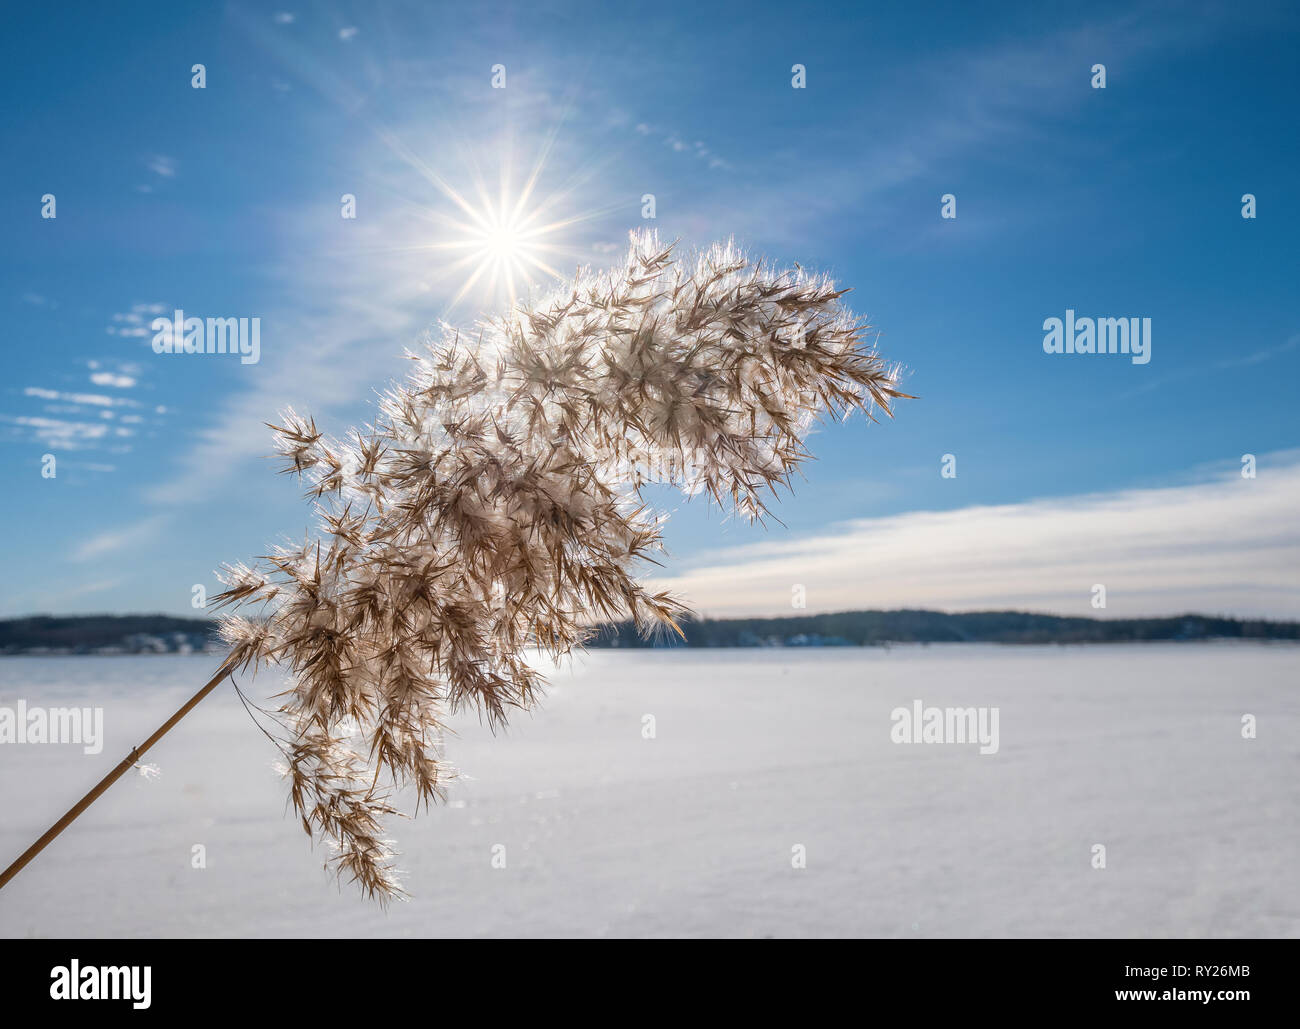 Bright winter day with common reed and sun beams at lake in Finland Stock Photo